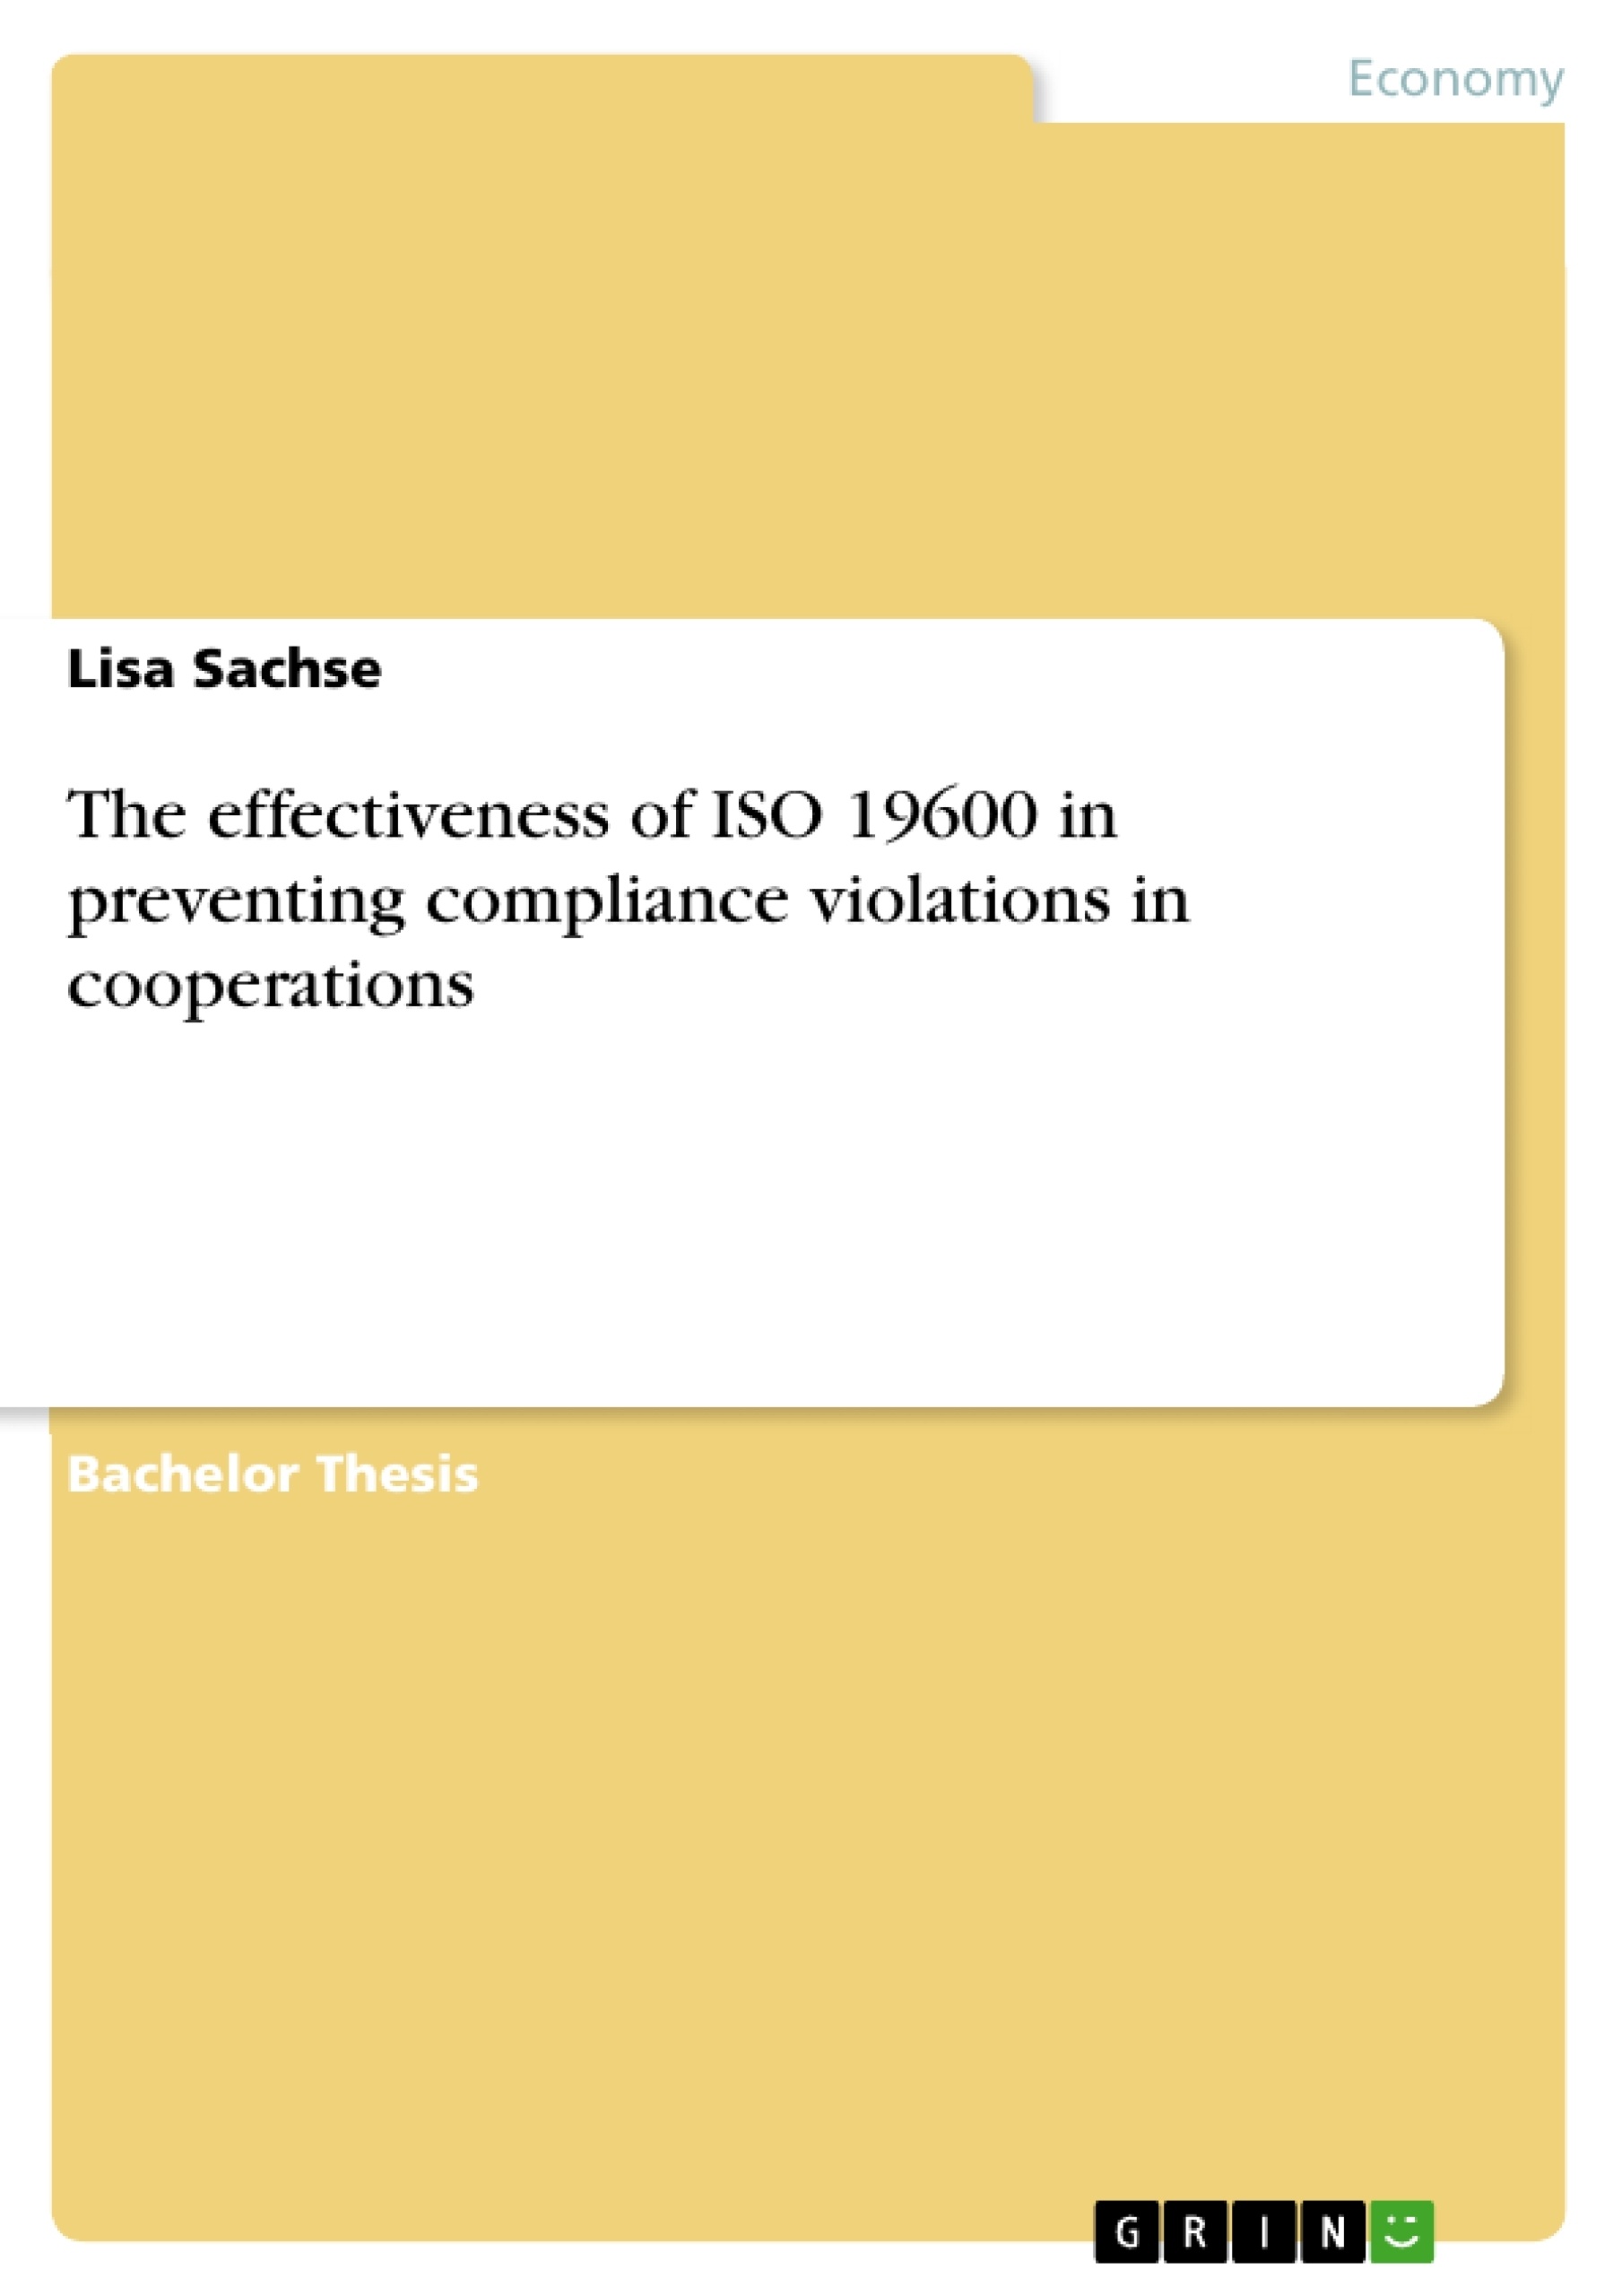 Title: The effectiveness of ISO 19600 in preventing compliance violations in cooperations